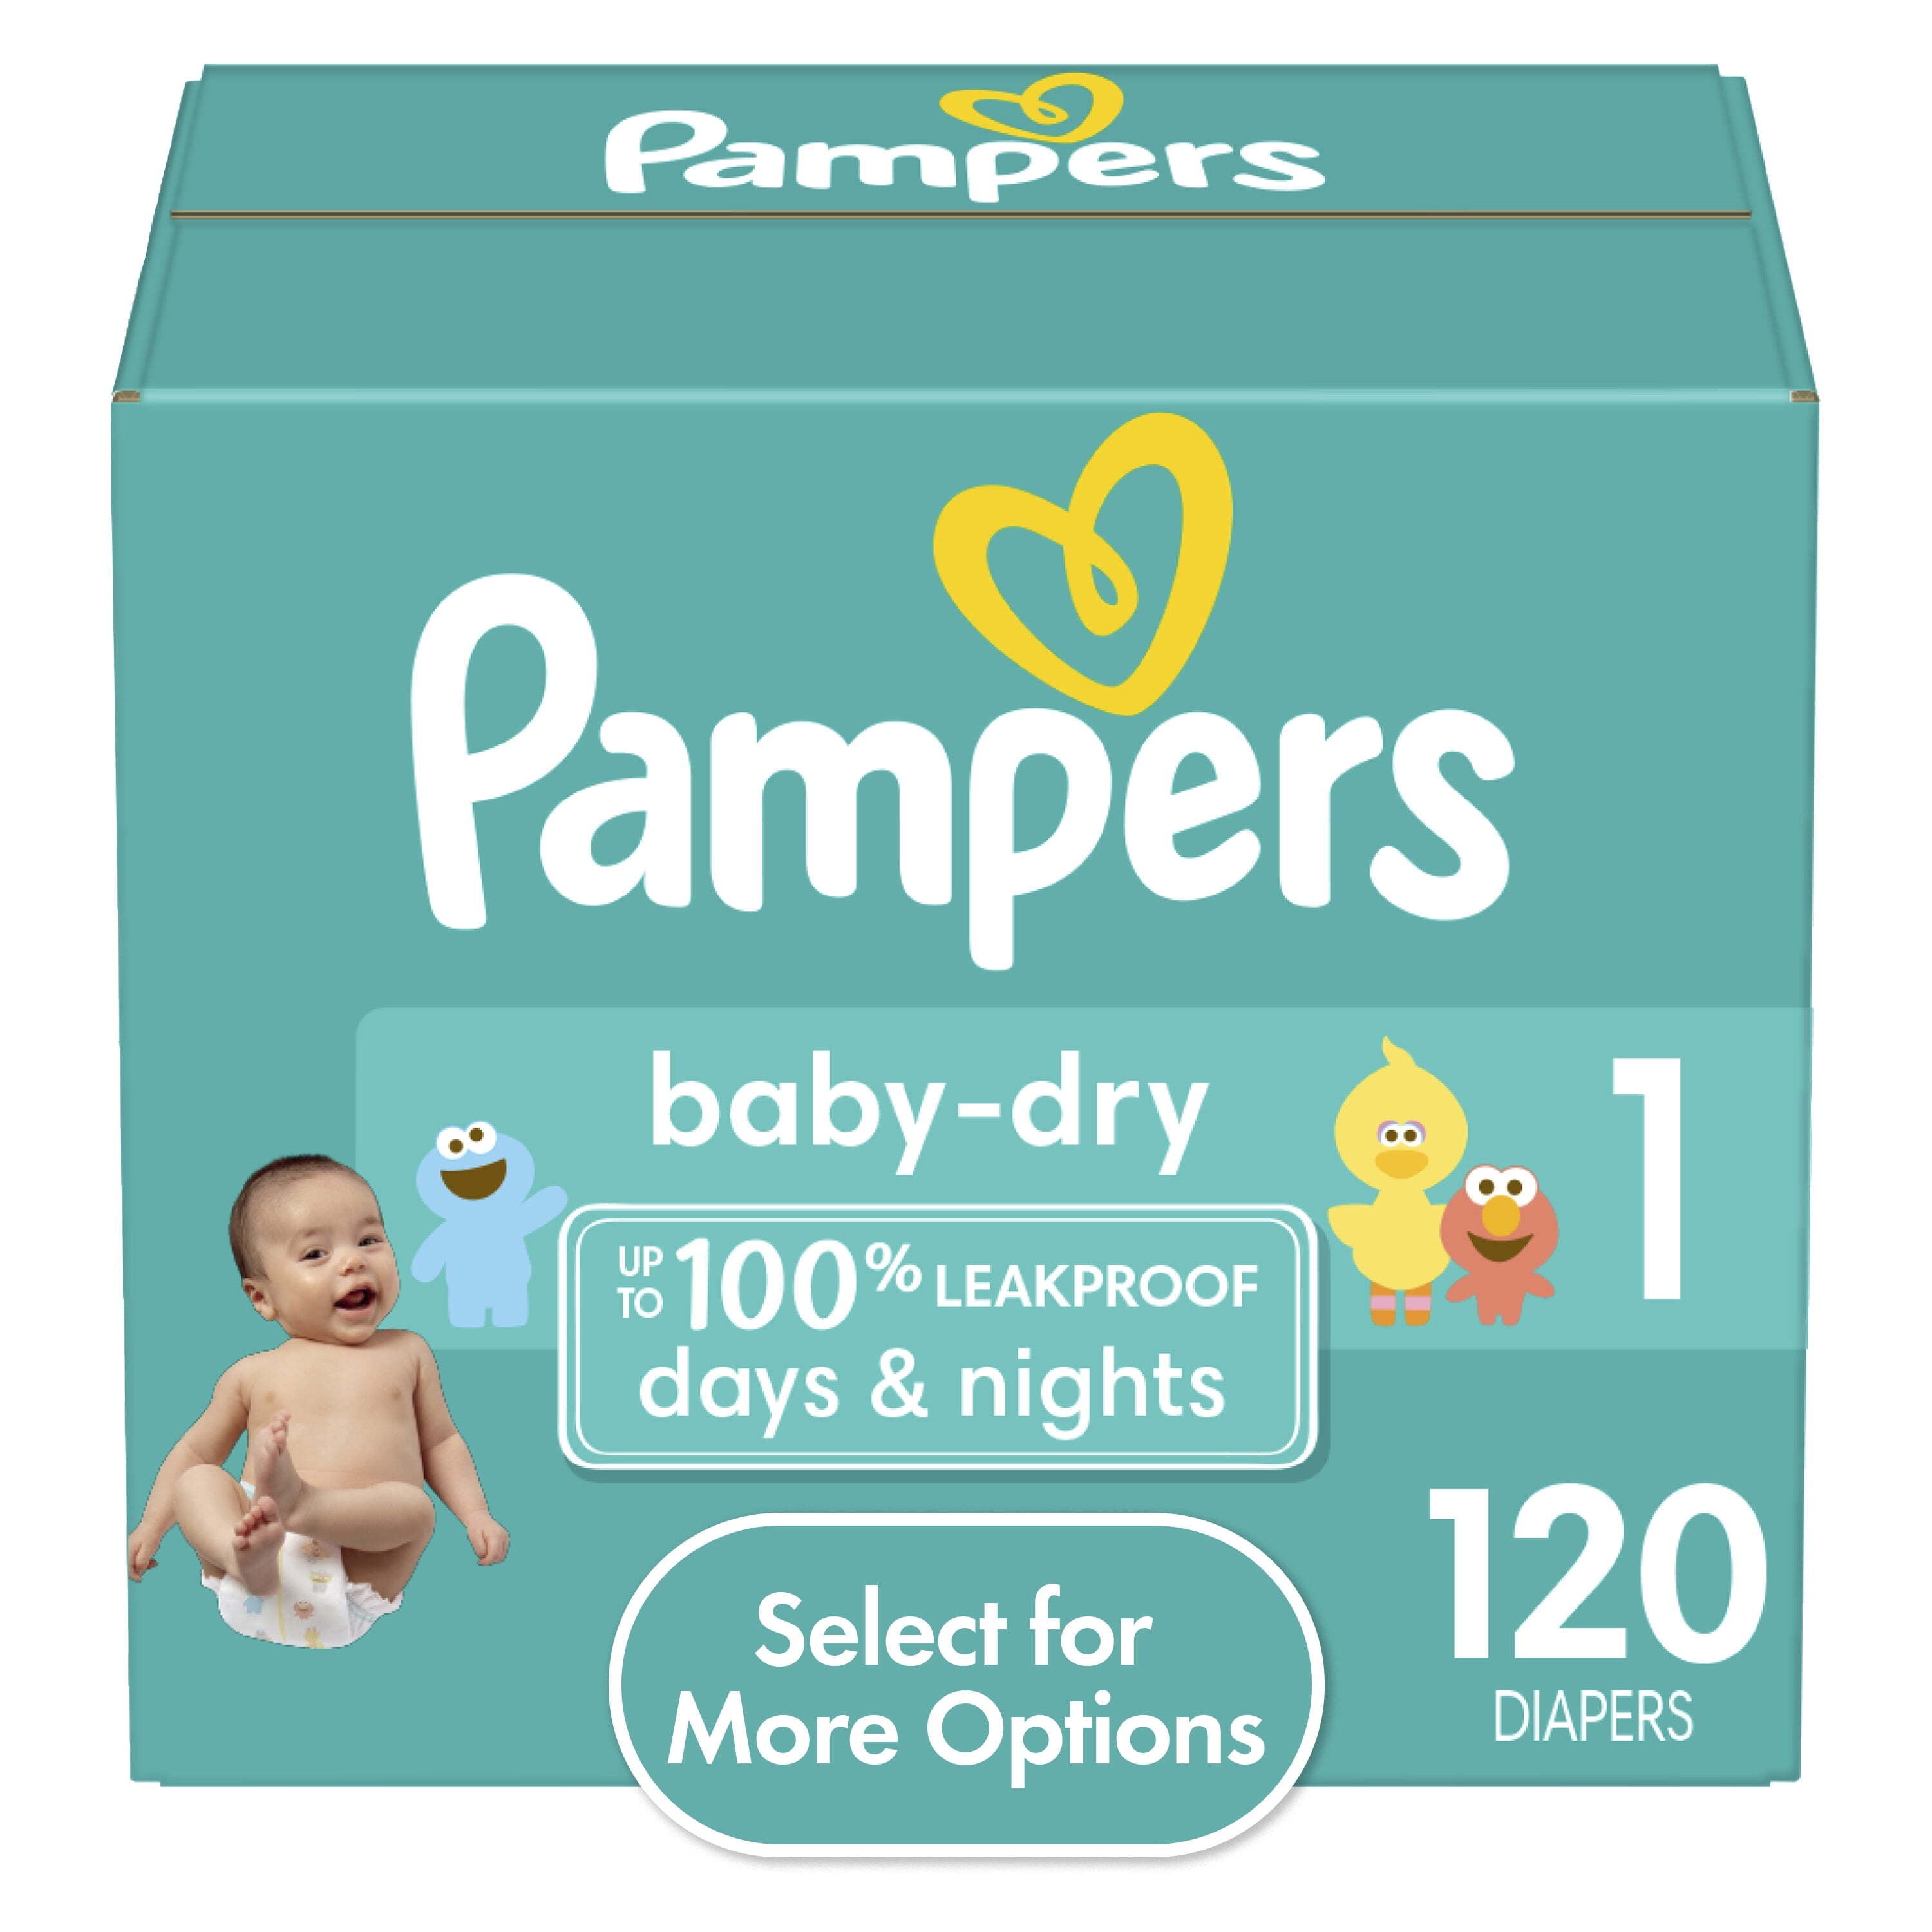 Pampers Couches Baby-Dry Taille 8 (17+ kg), 120 Couches Bébé, Pack 1 Mois -  Pampers